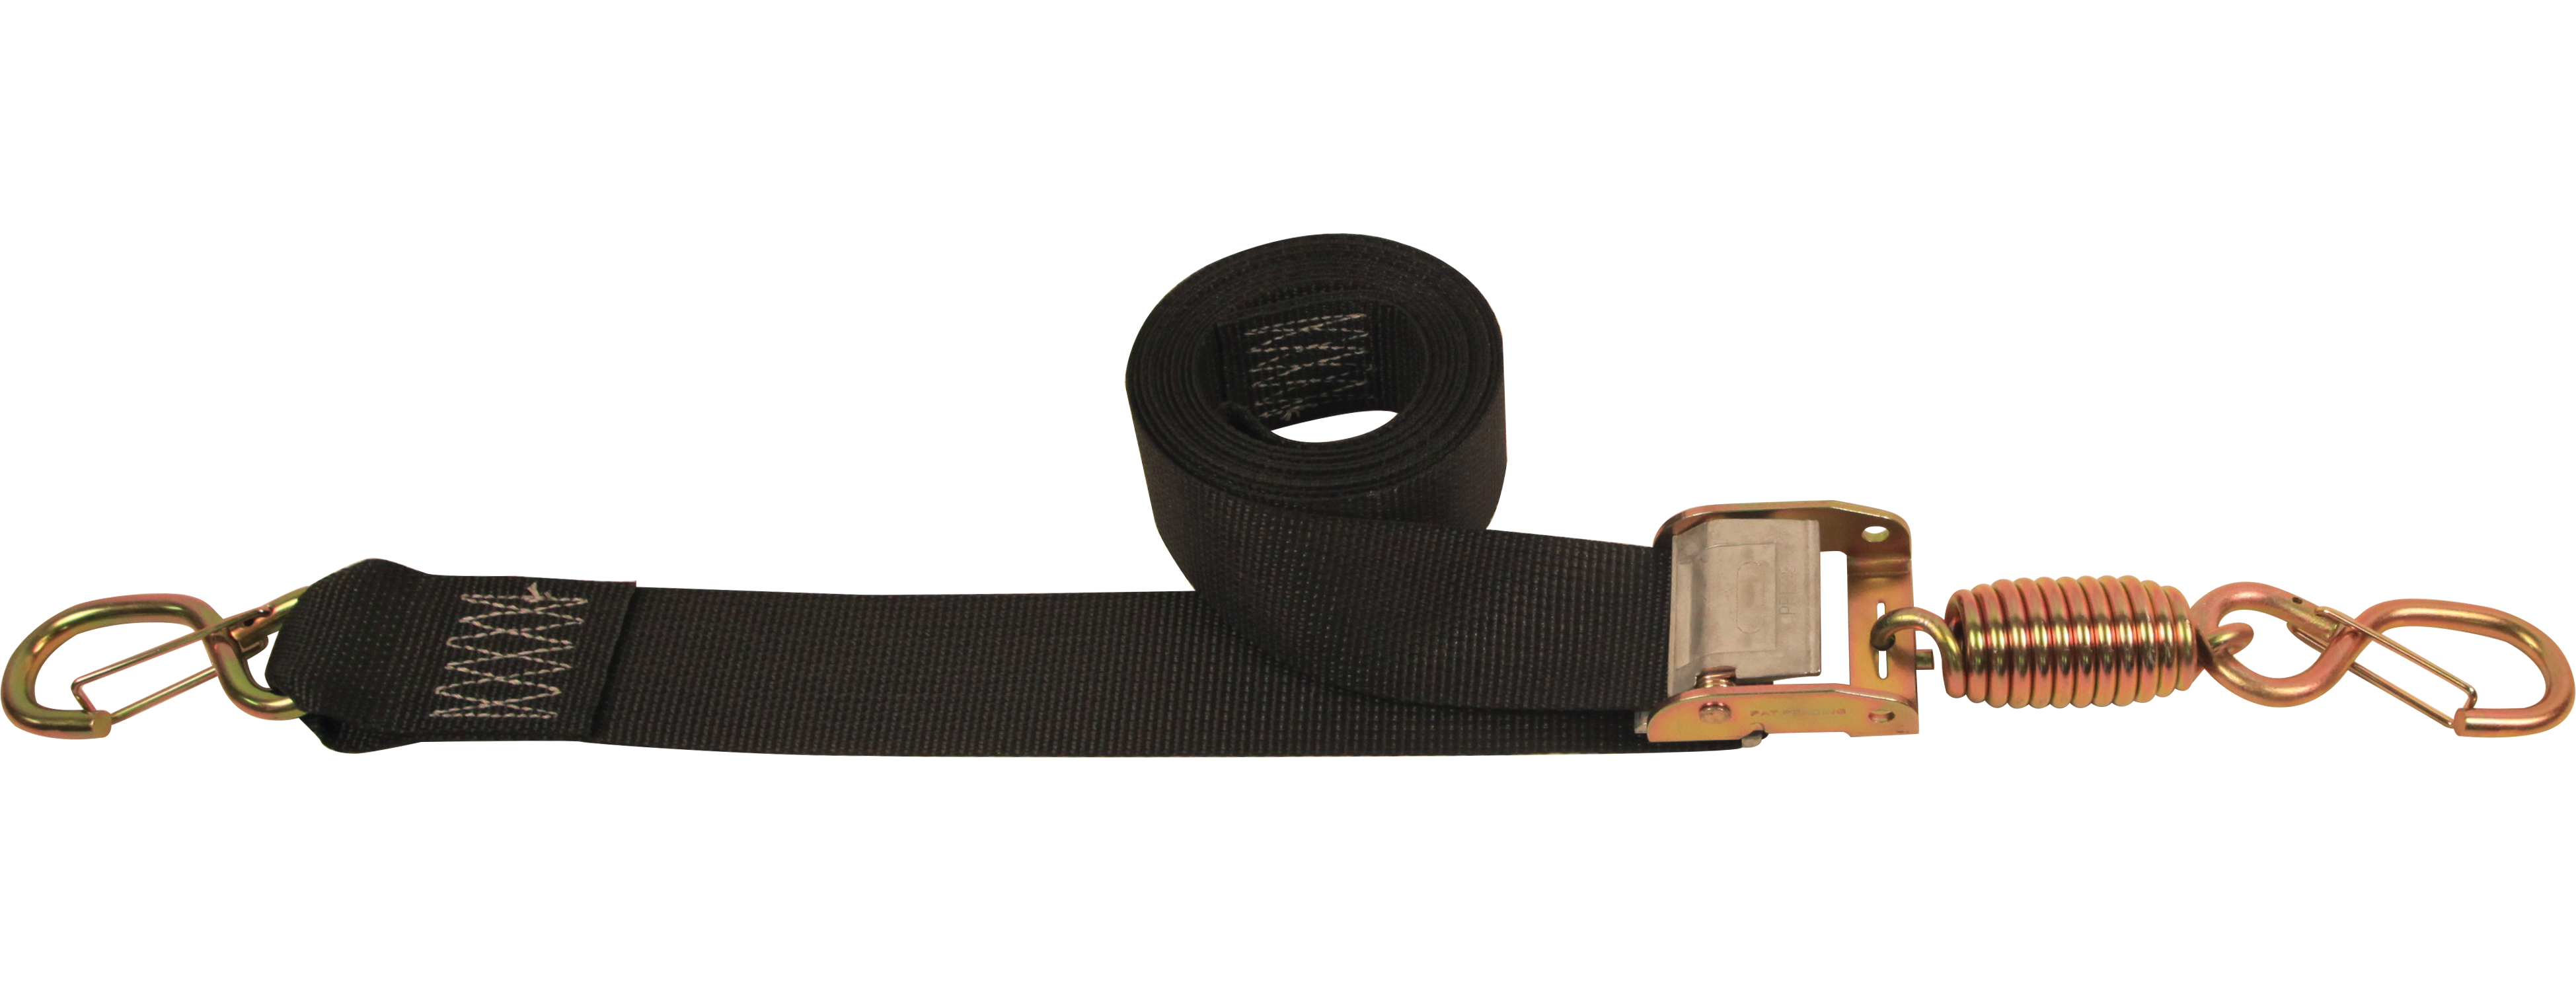 2 Spring Loaded Cam Buckle Strap With Keeper S Hooks